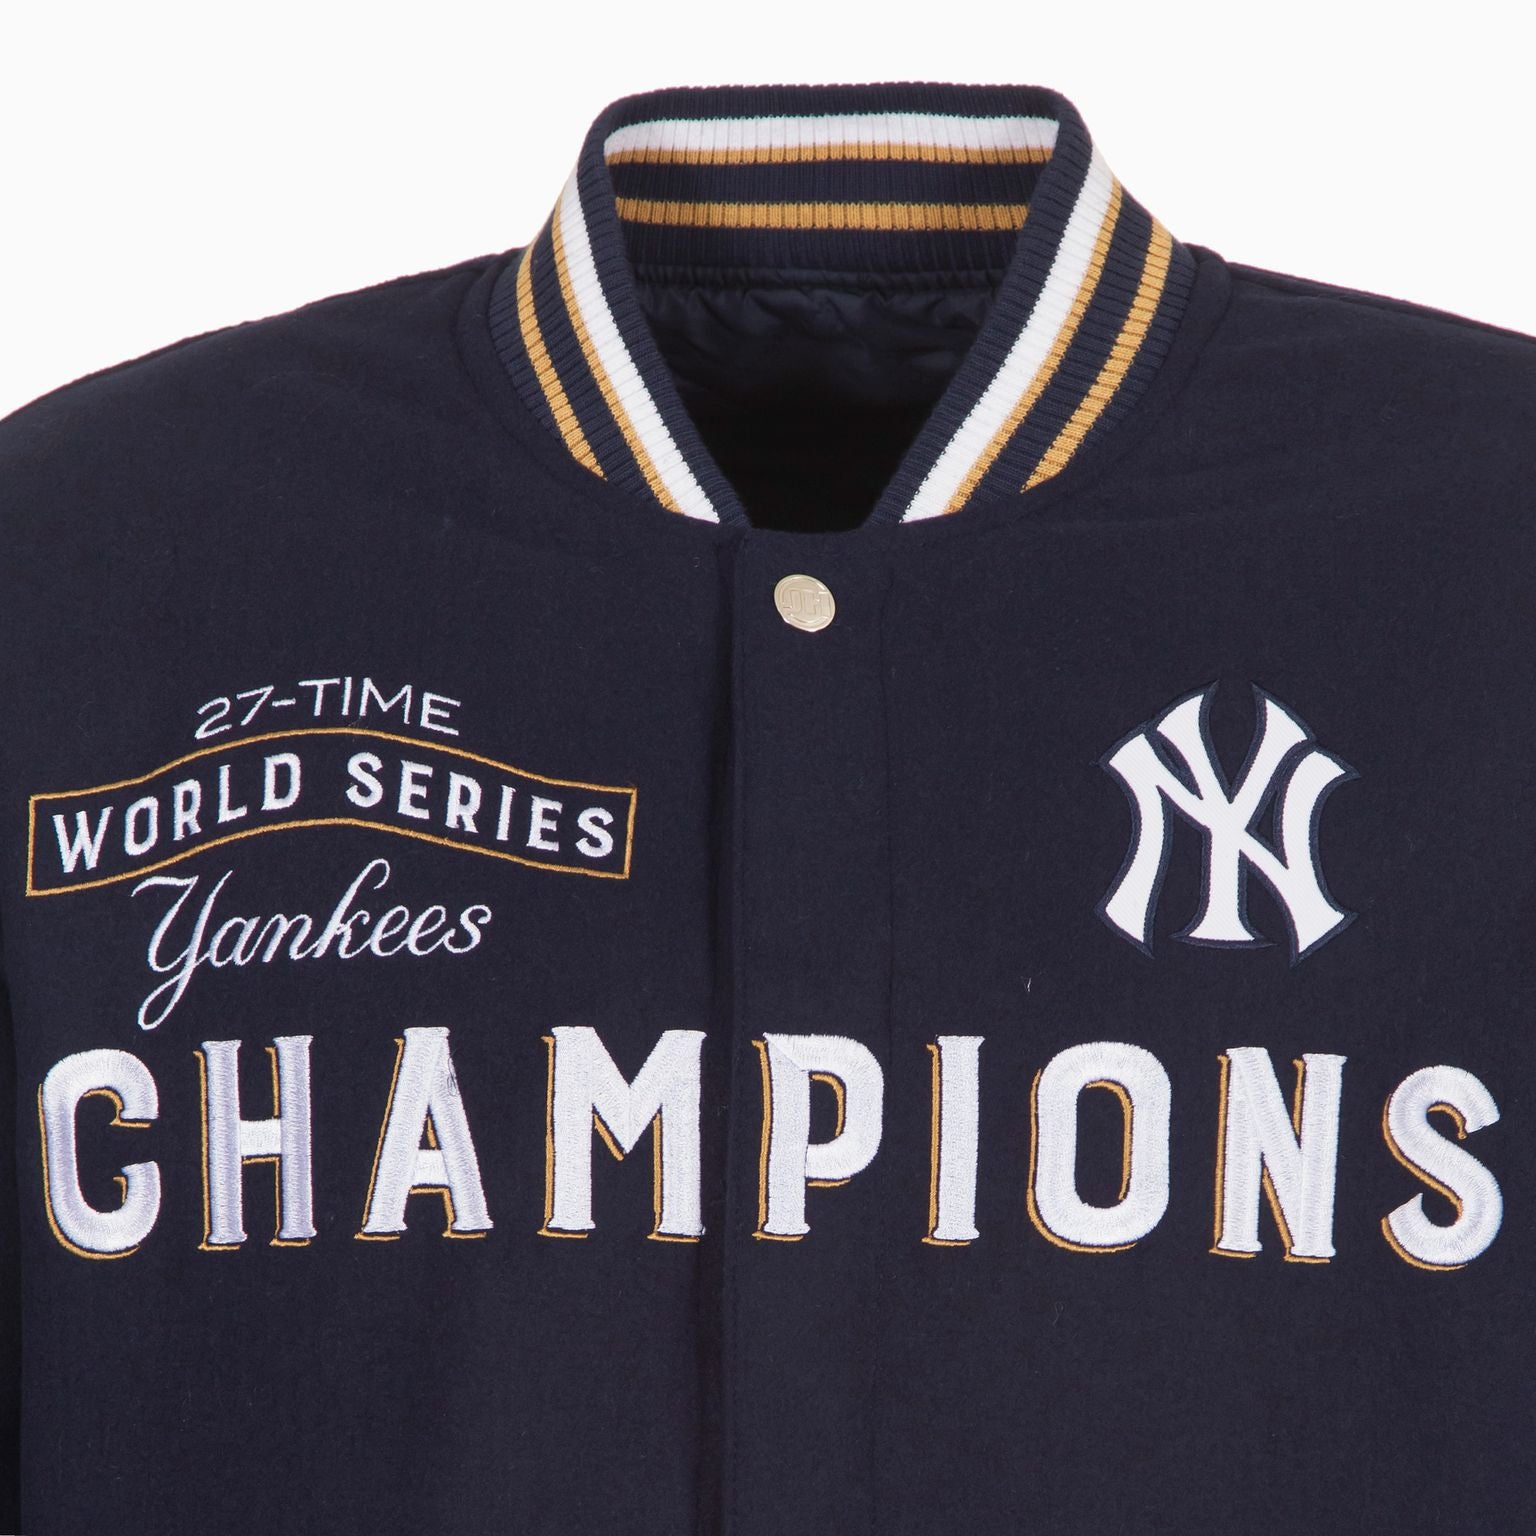 New York Yankees Embroidered Wool 27-Time World Series Champions Tradi